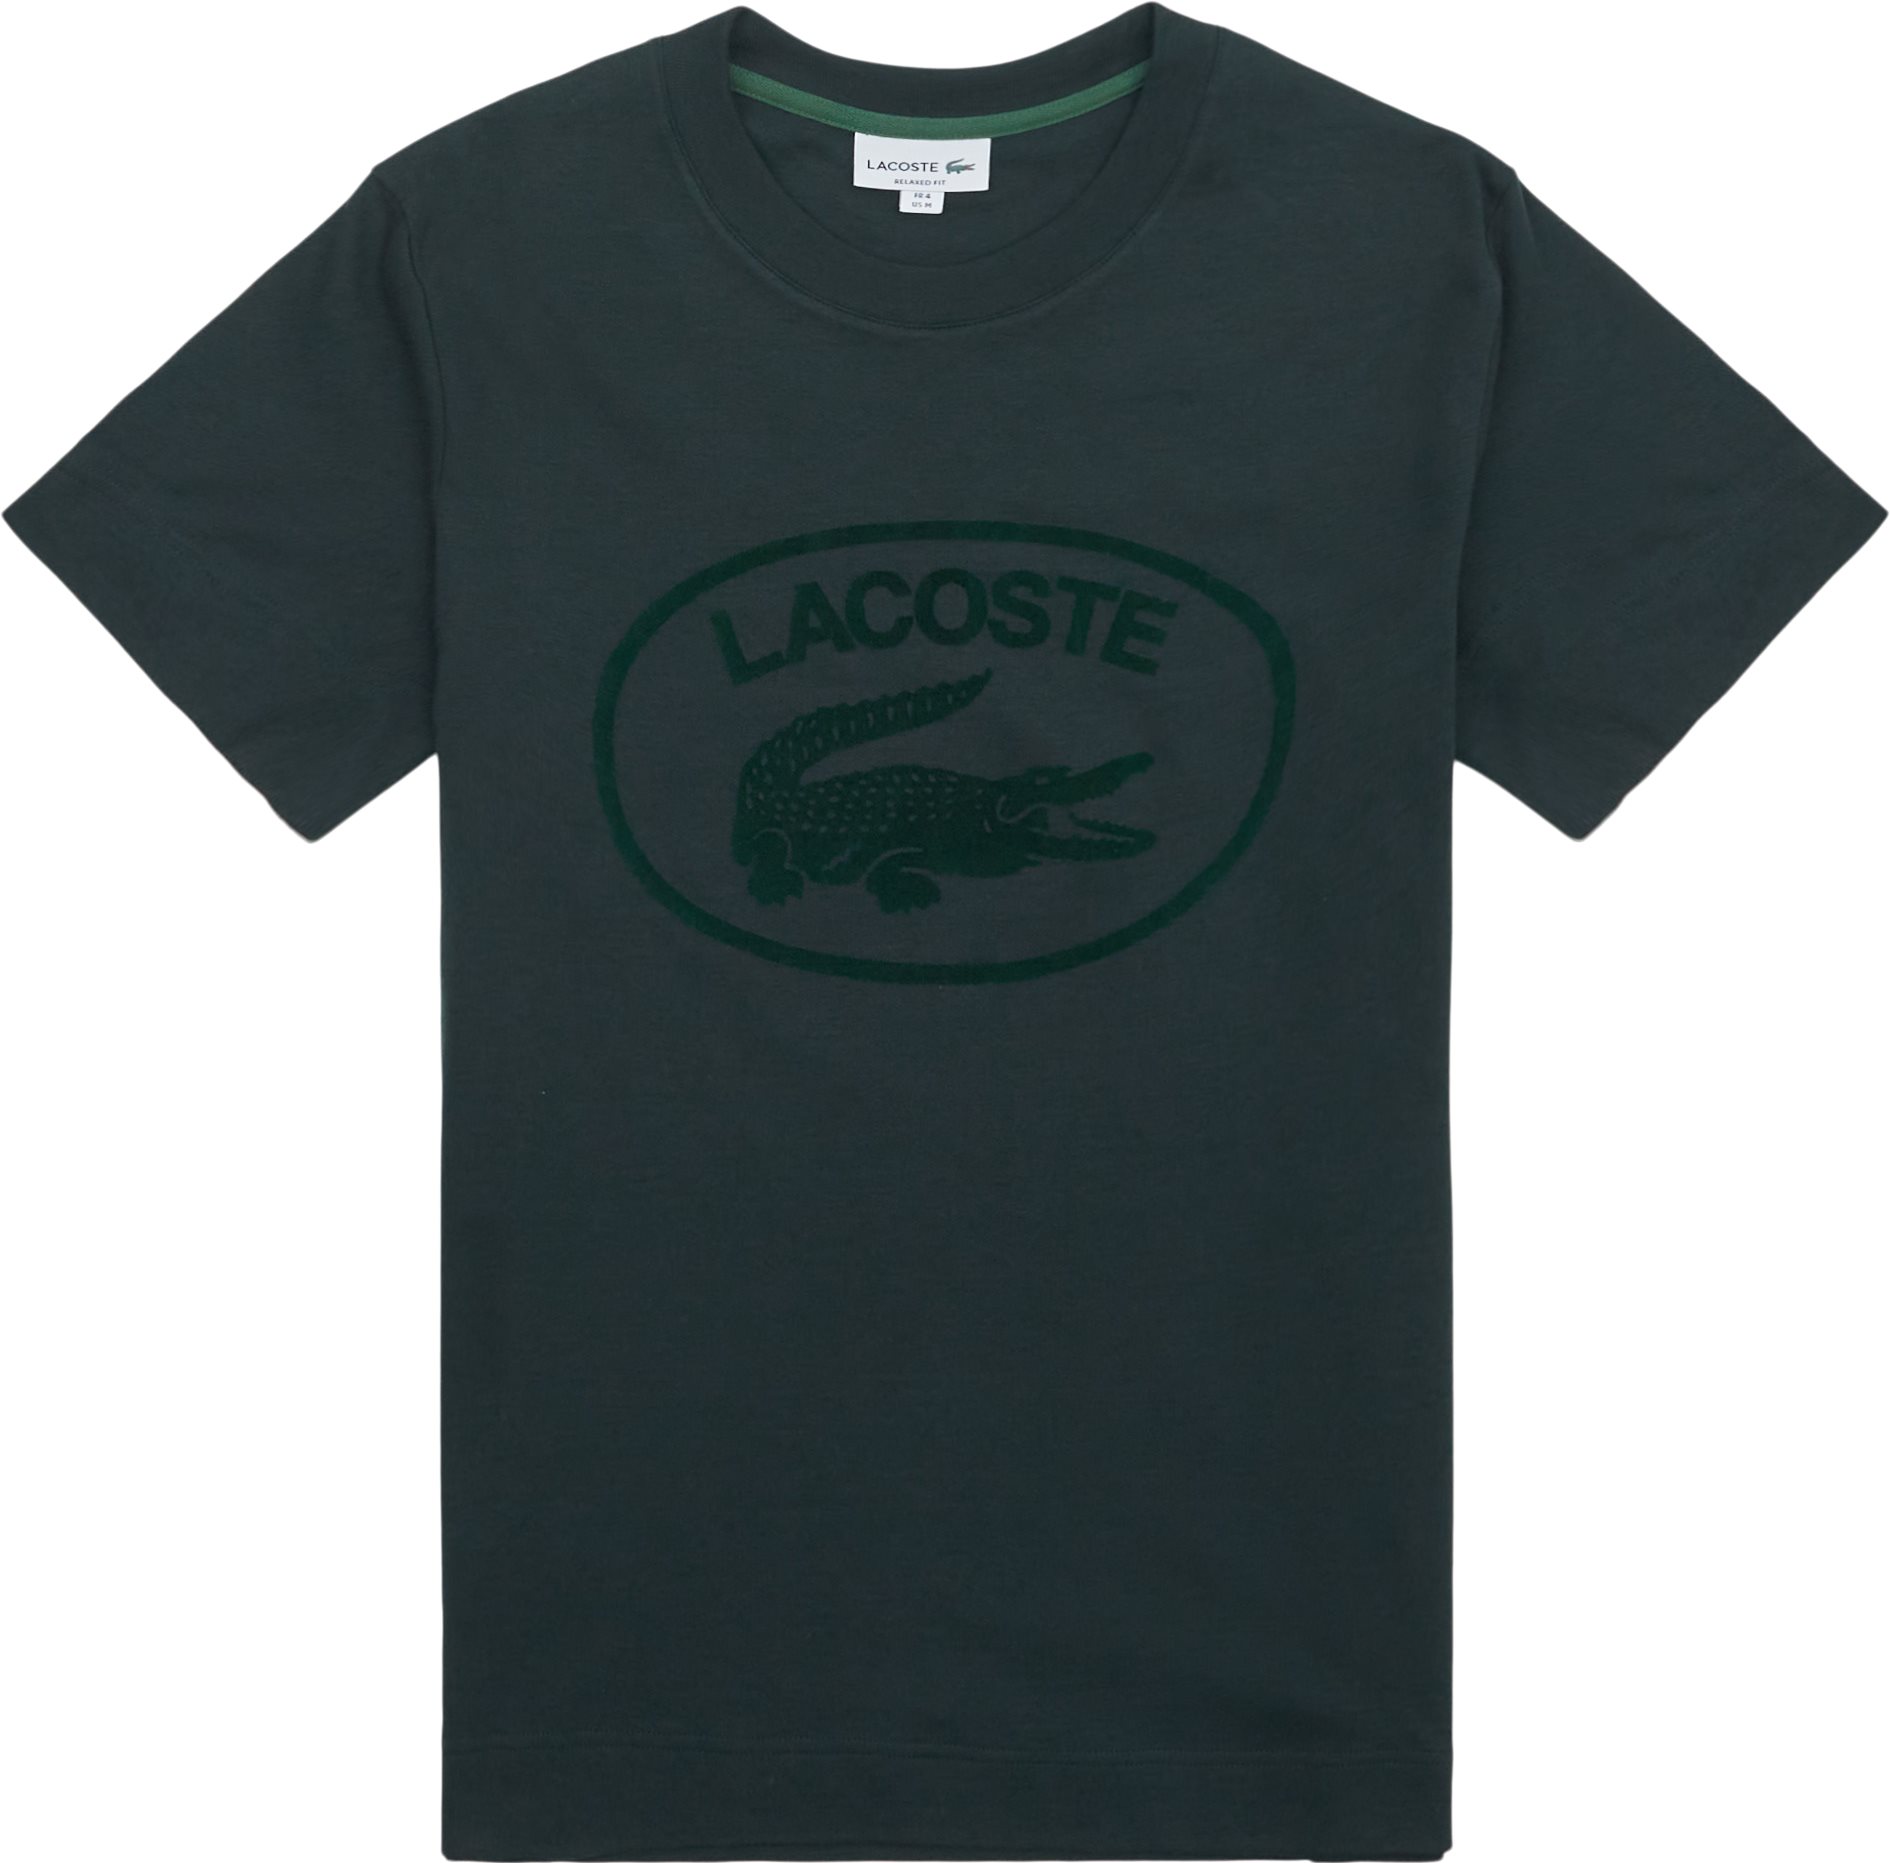 Lacoste T-shirts TH0244 Army